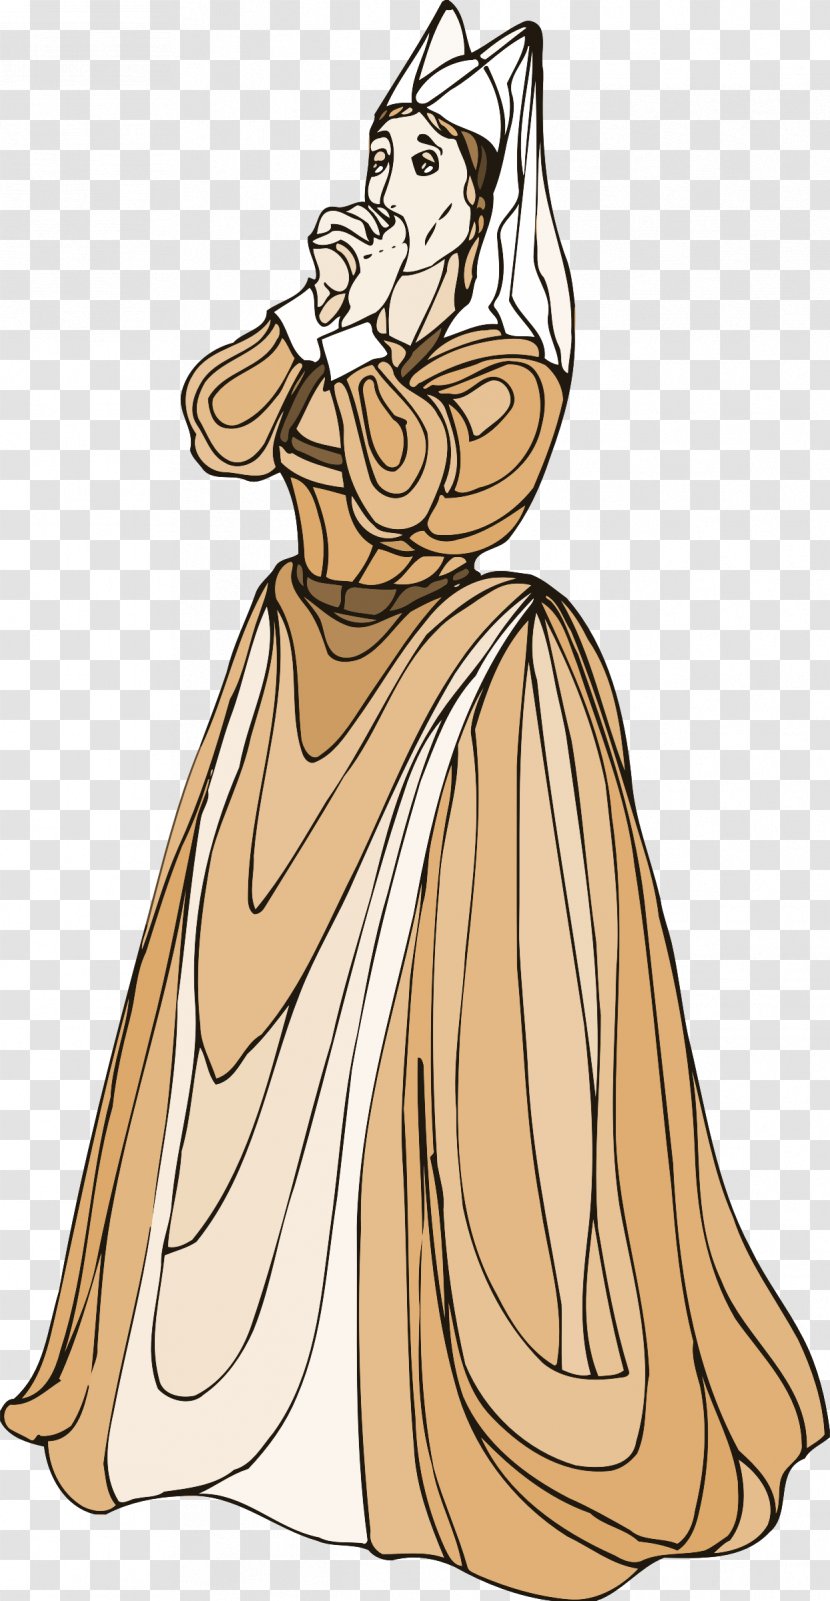 Romeo And Juliet Lady Macbeth - Tree Transparent PNG